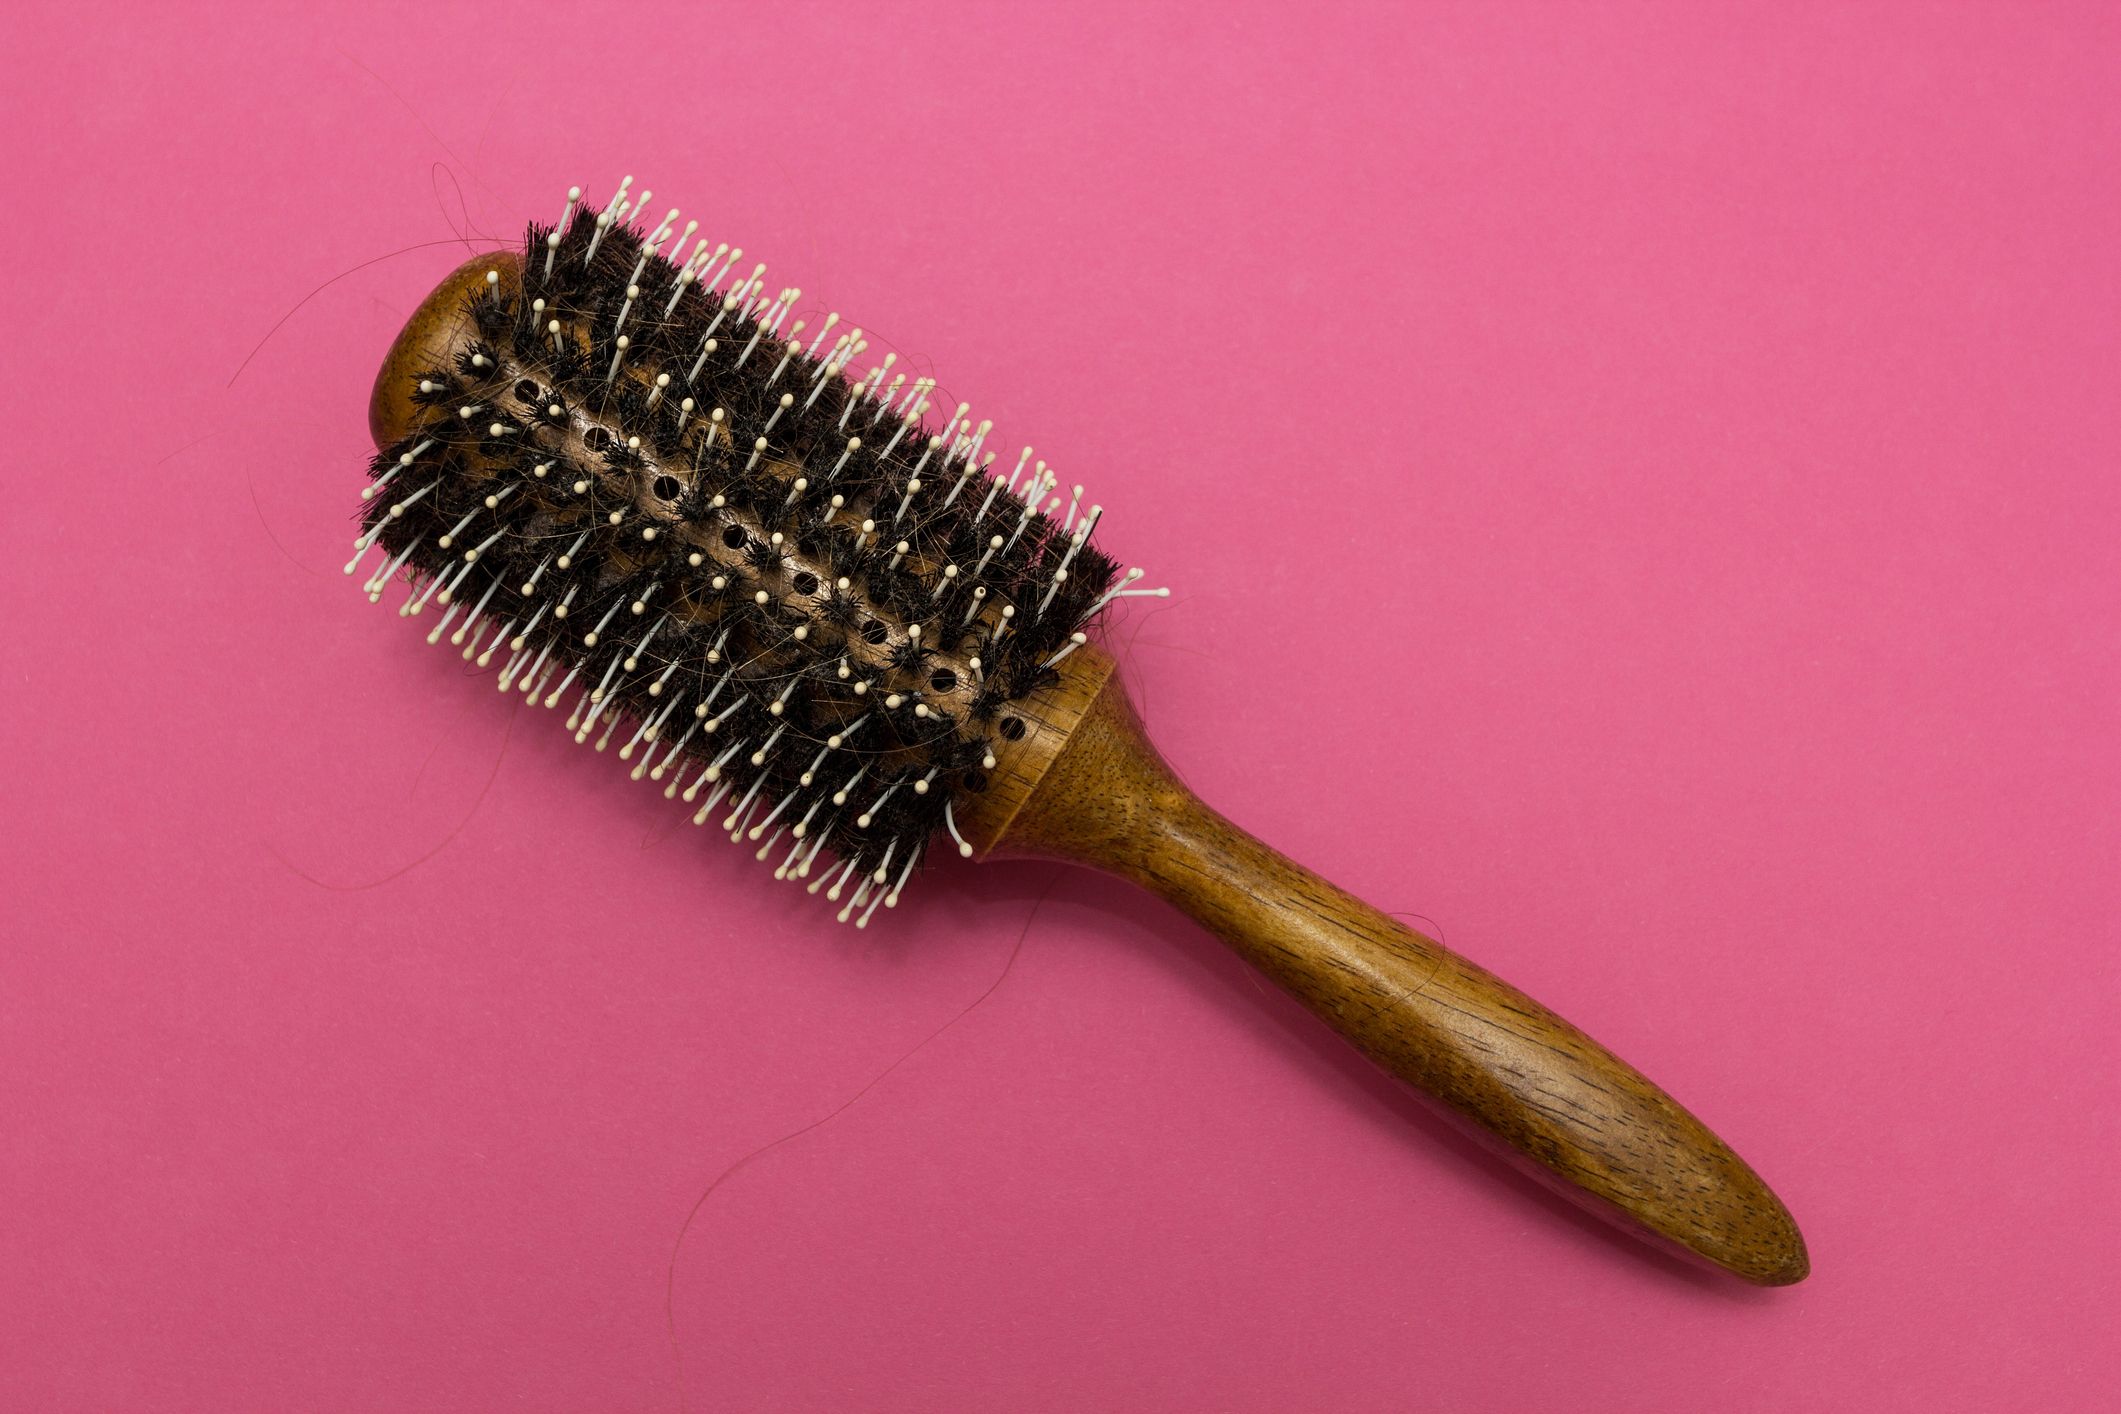 The best way to clean your brush is this $12 hair brush cleaner tool